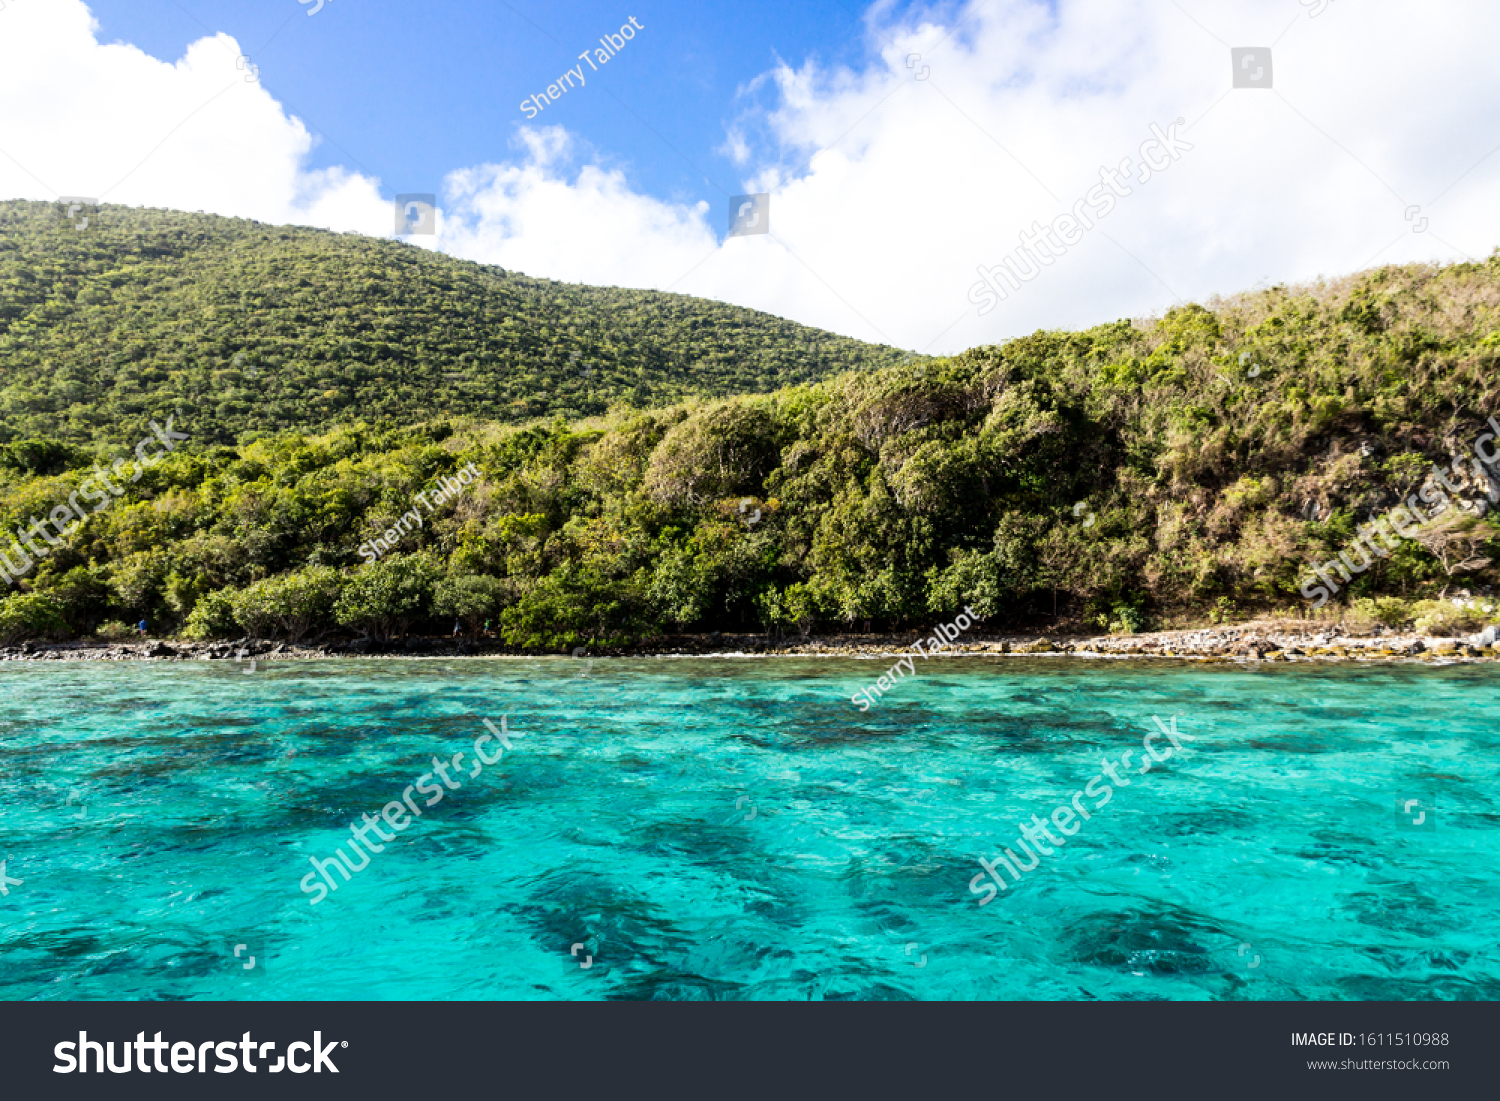 Mary Creek On Leinster Bay St Stock Photo 1611510988 ...